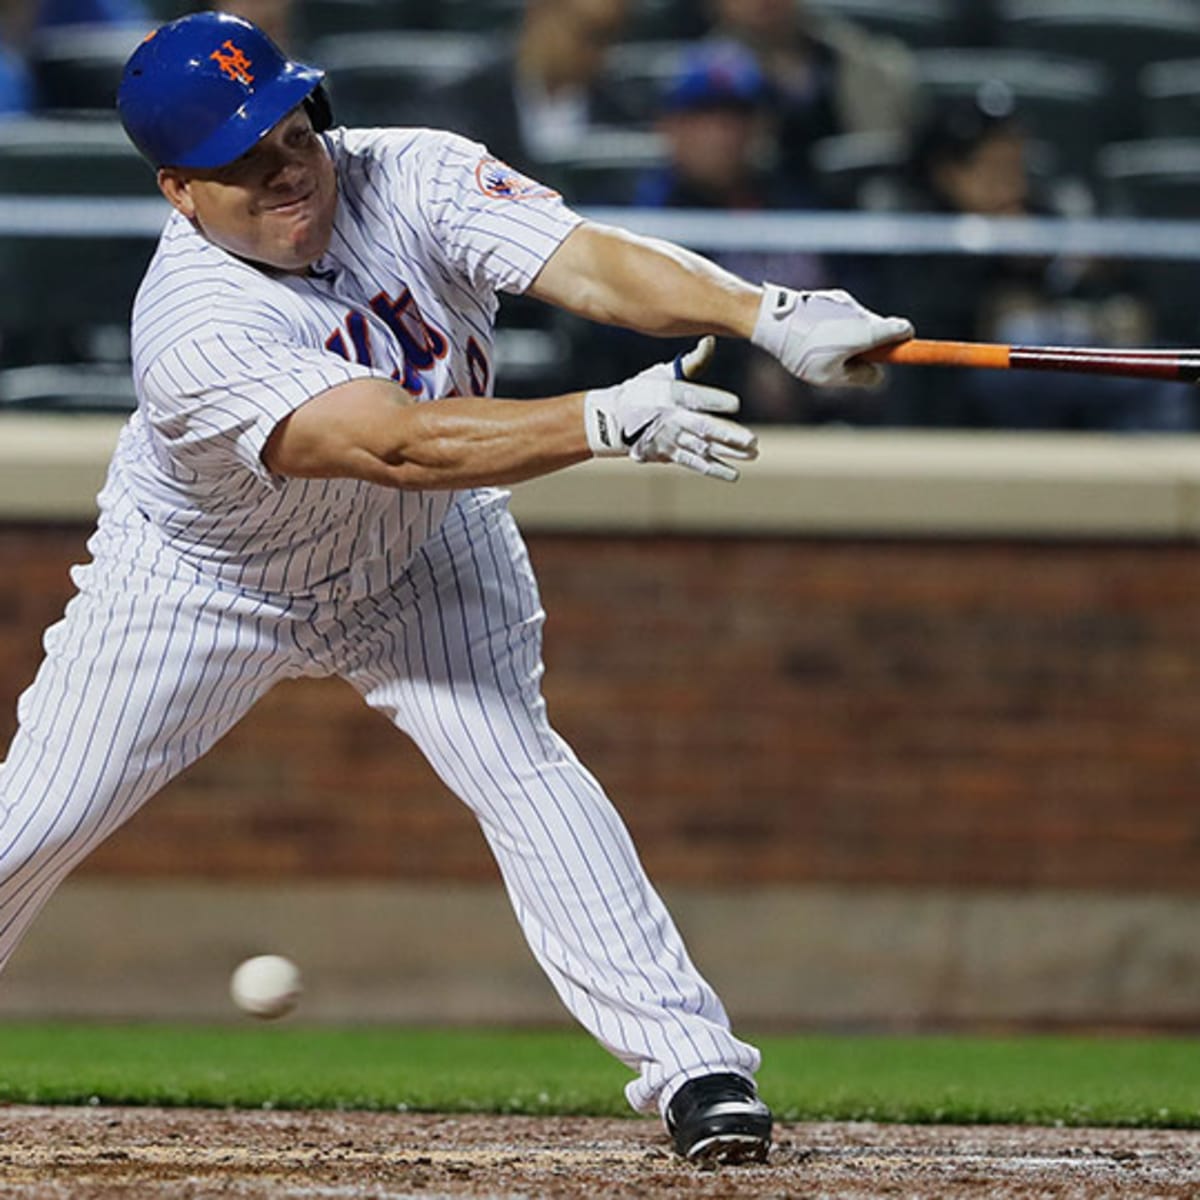 What makes Mets' Bartolo Colon so much fun to watch? - Sports Illustrated